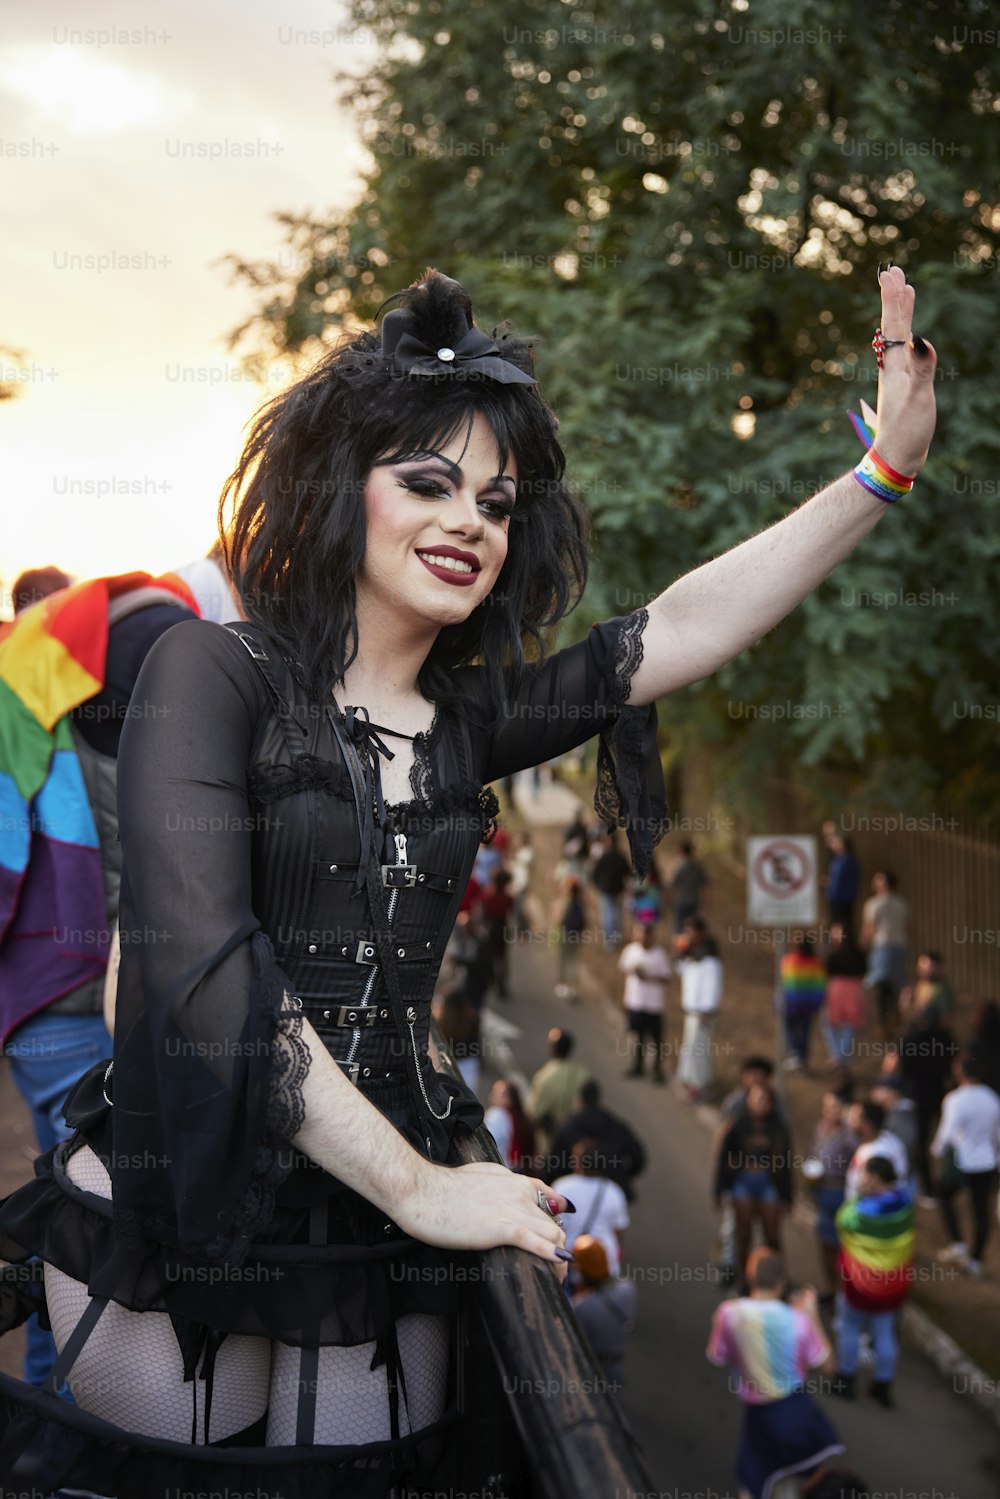 a woman in a black outfit and a rainbow flag